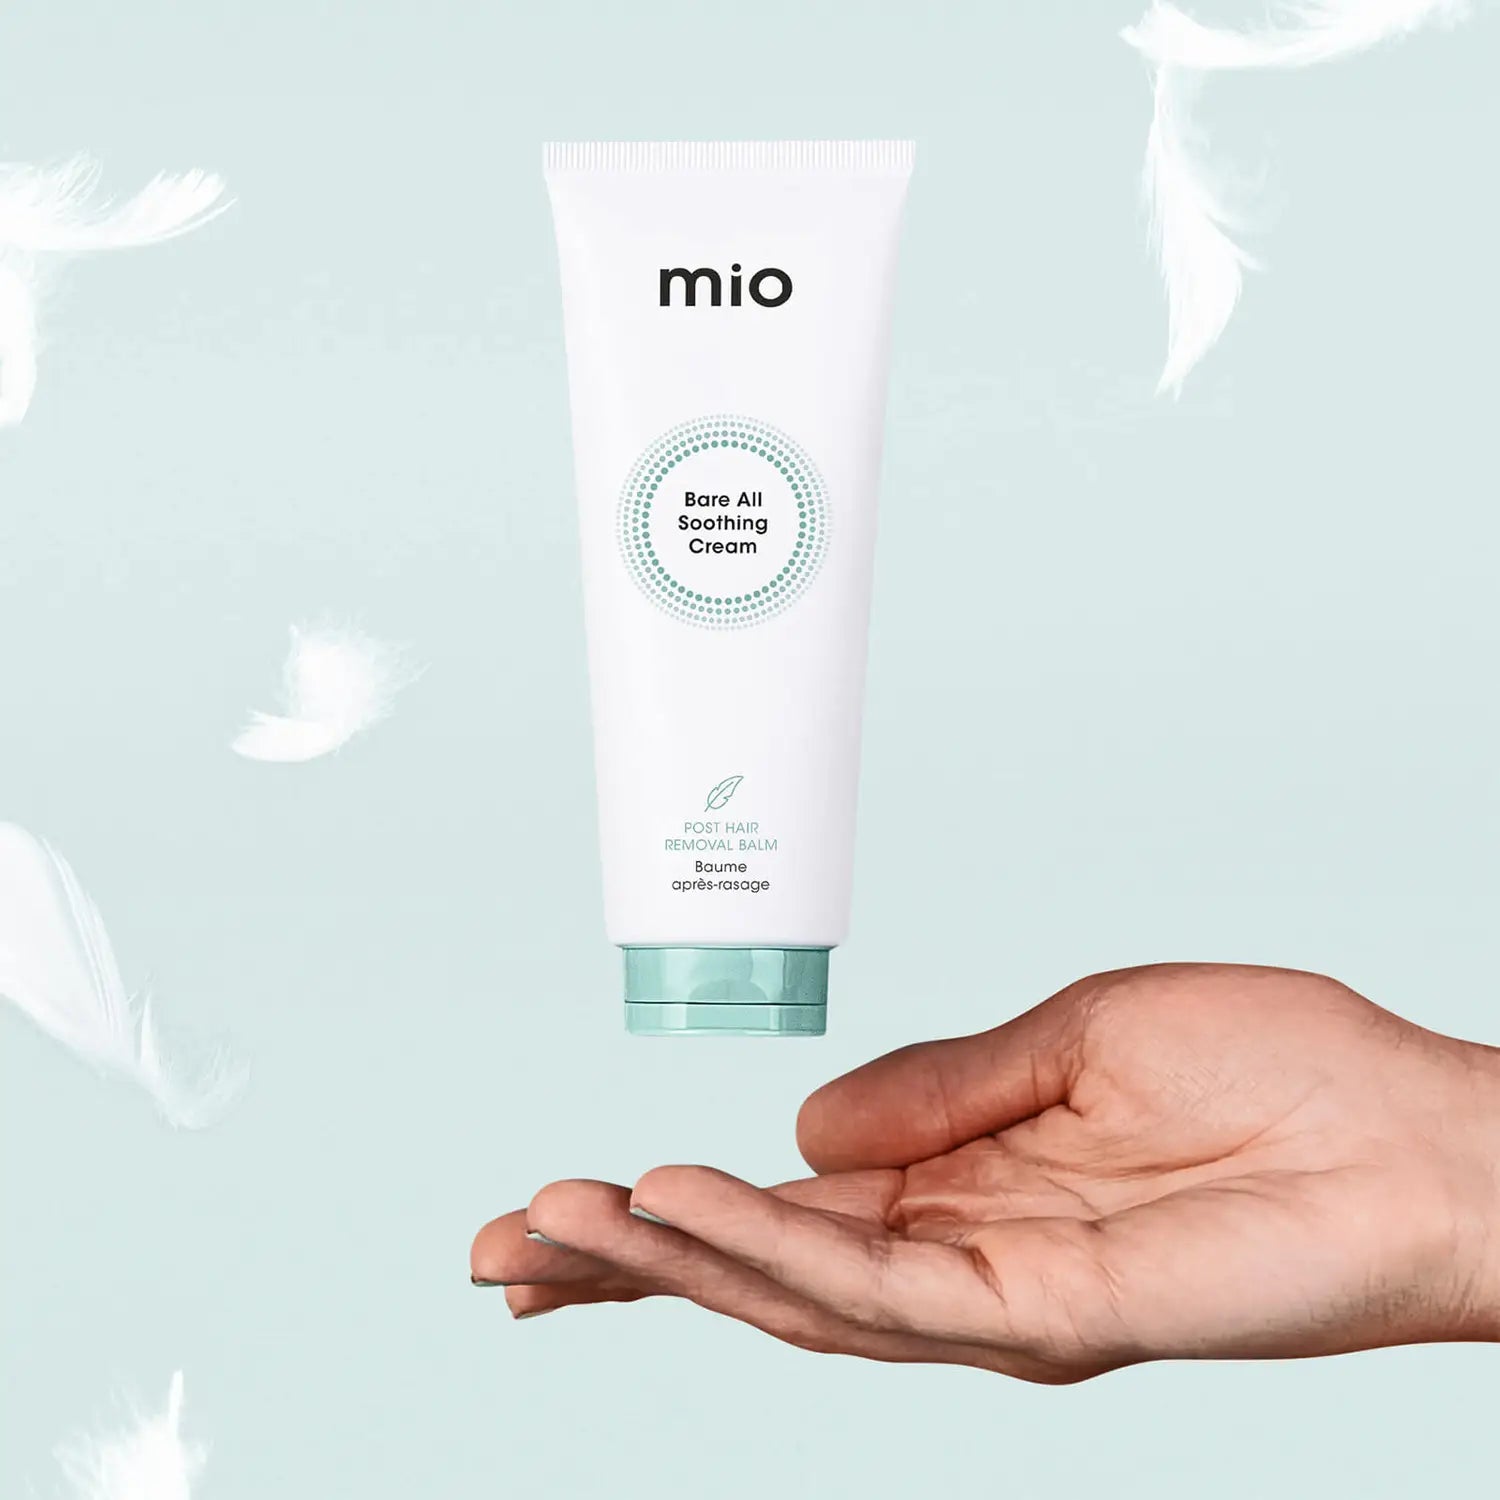 Mio Skincare Bare All Soothing Cream - Post Hair Removal Balm at Socialite Beauty Canada